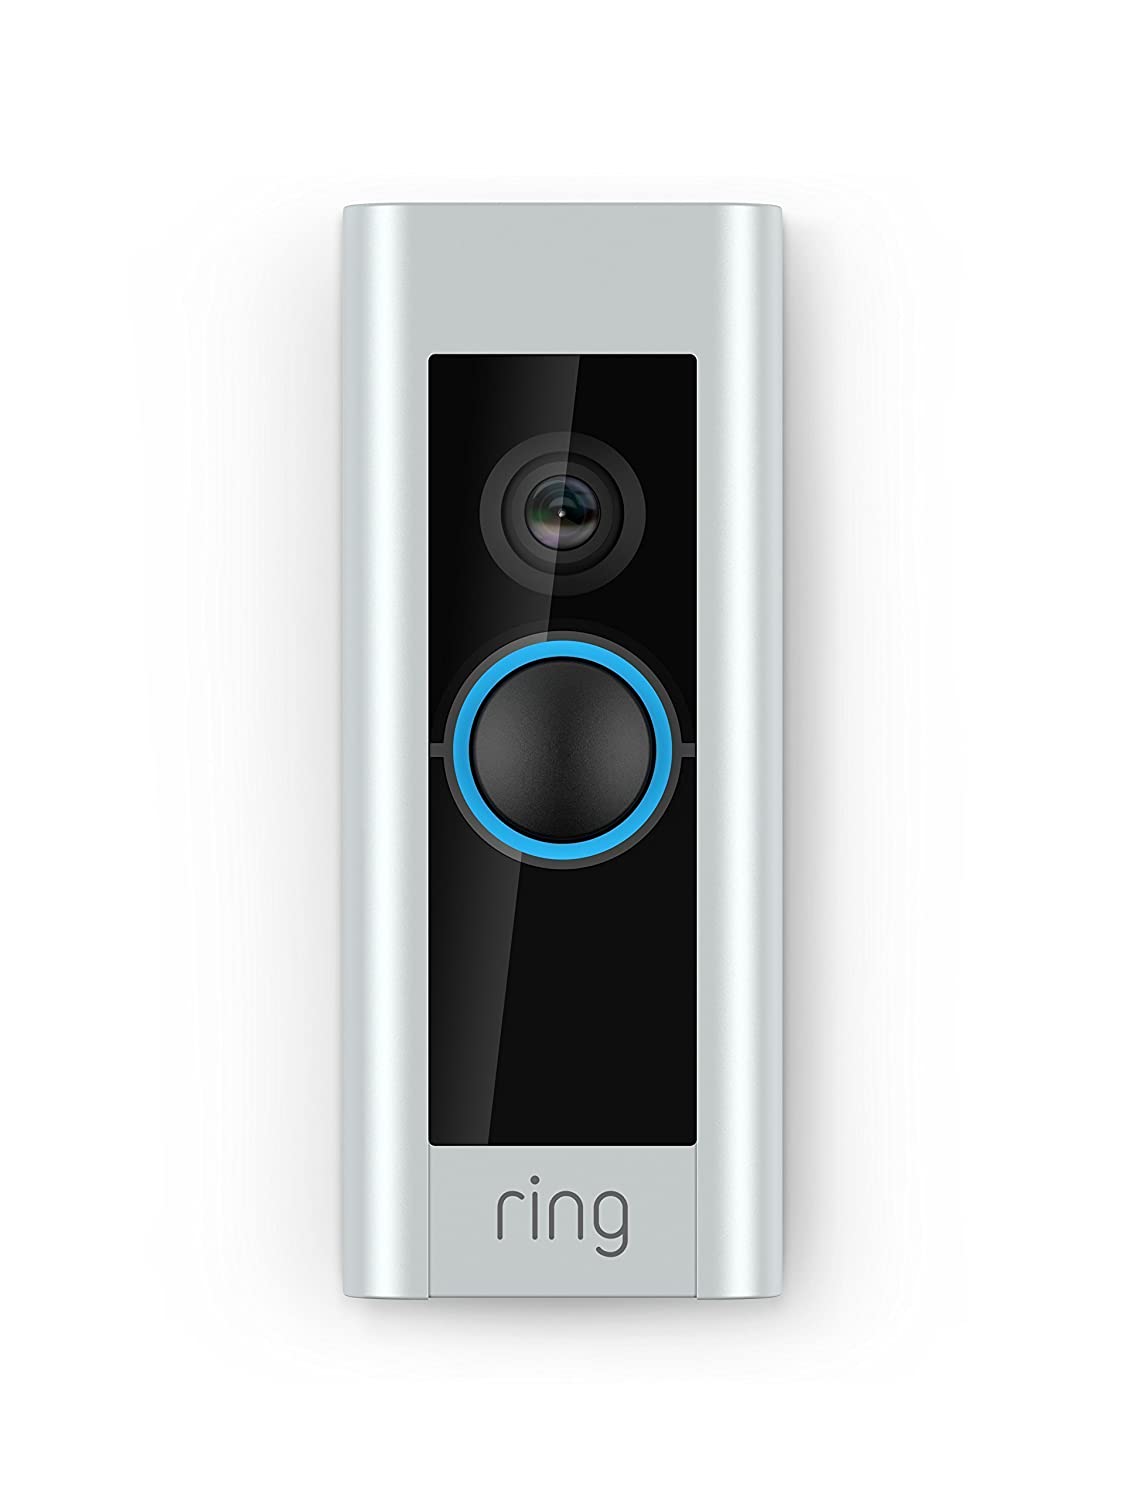 Devices to help you monitor your holiday deliveries: The Ring video doorbell